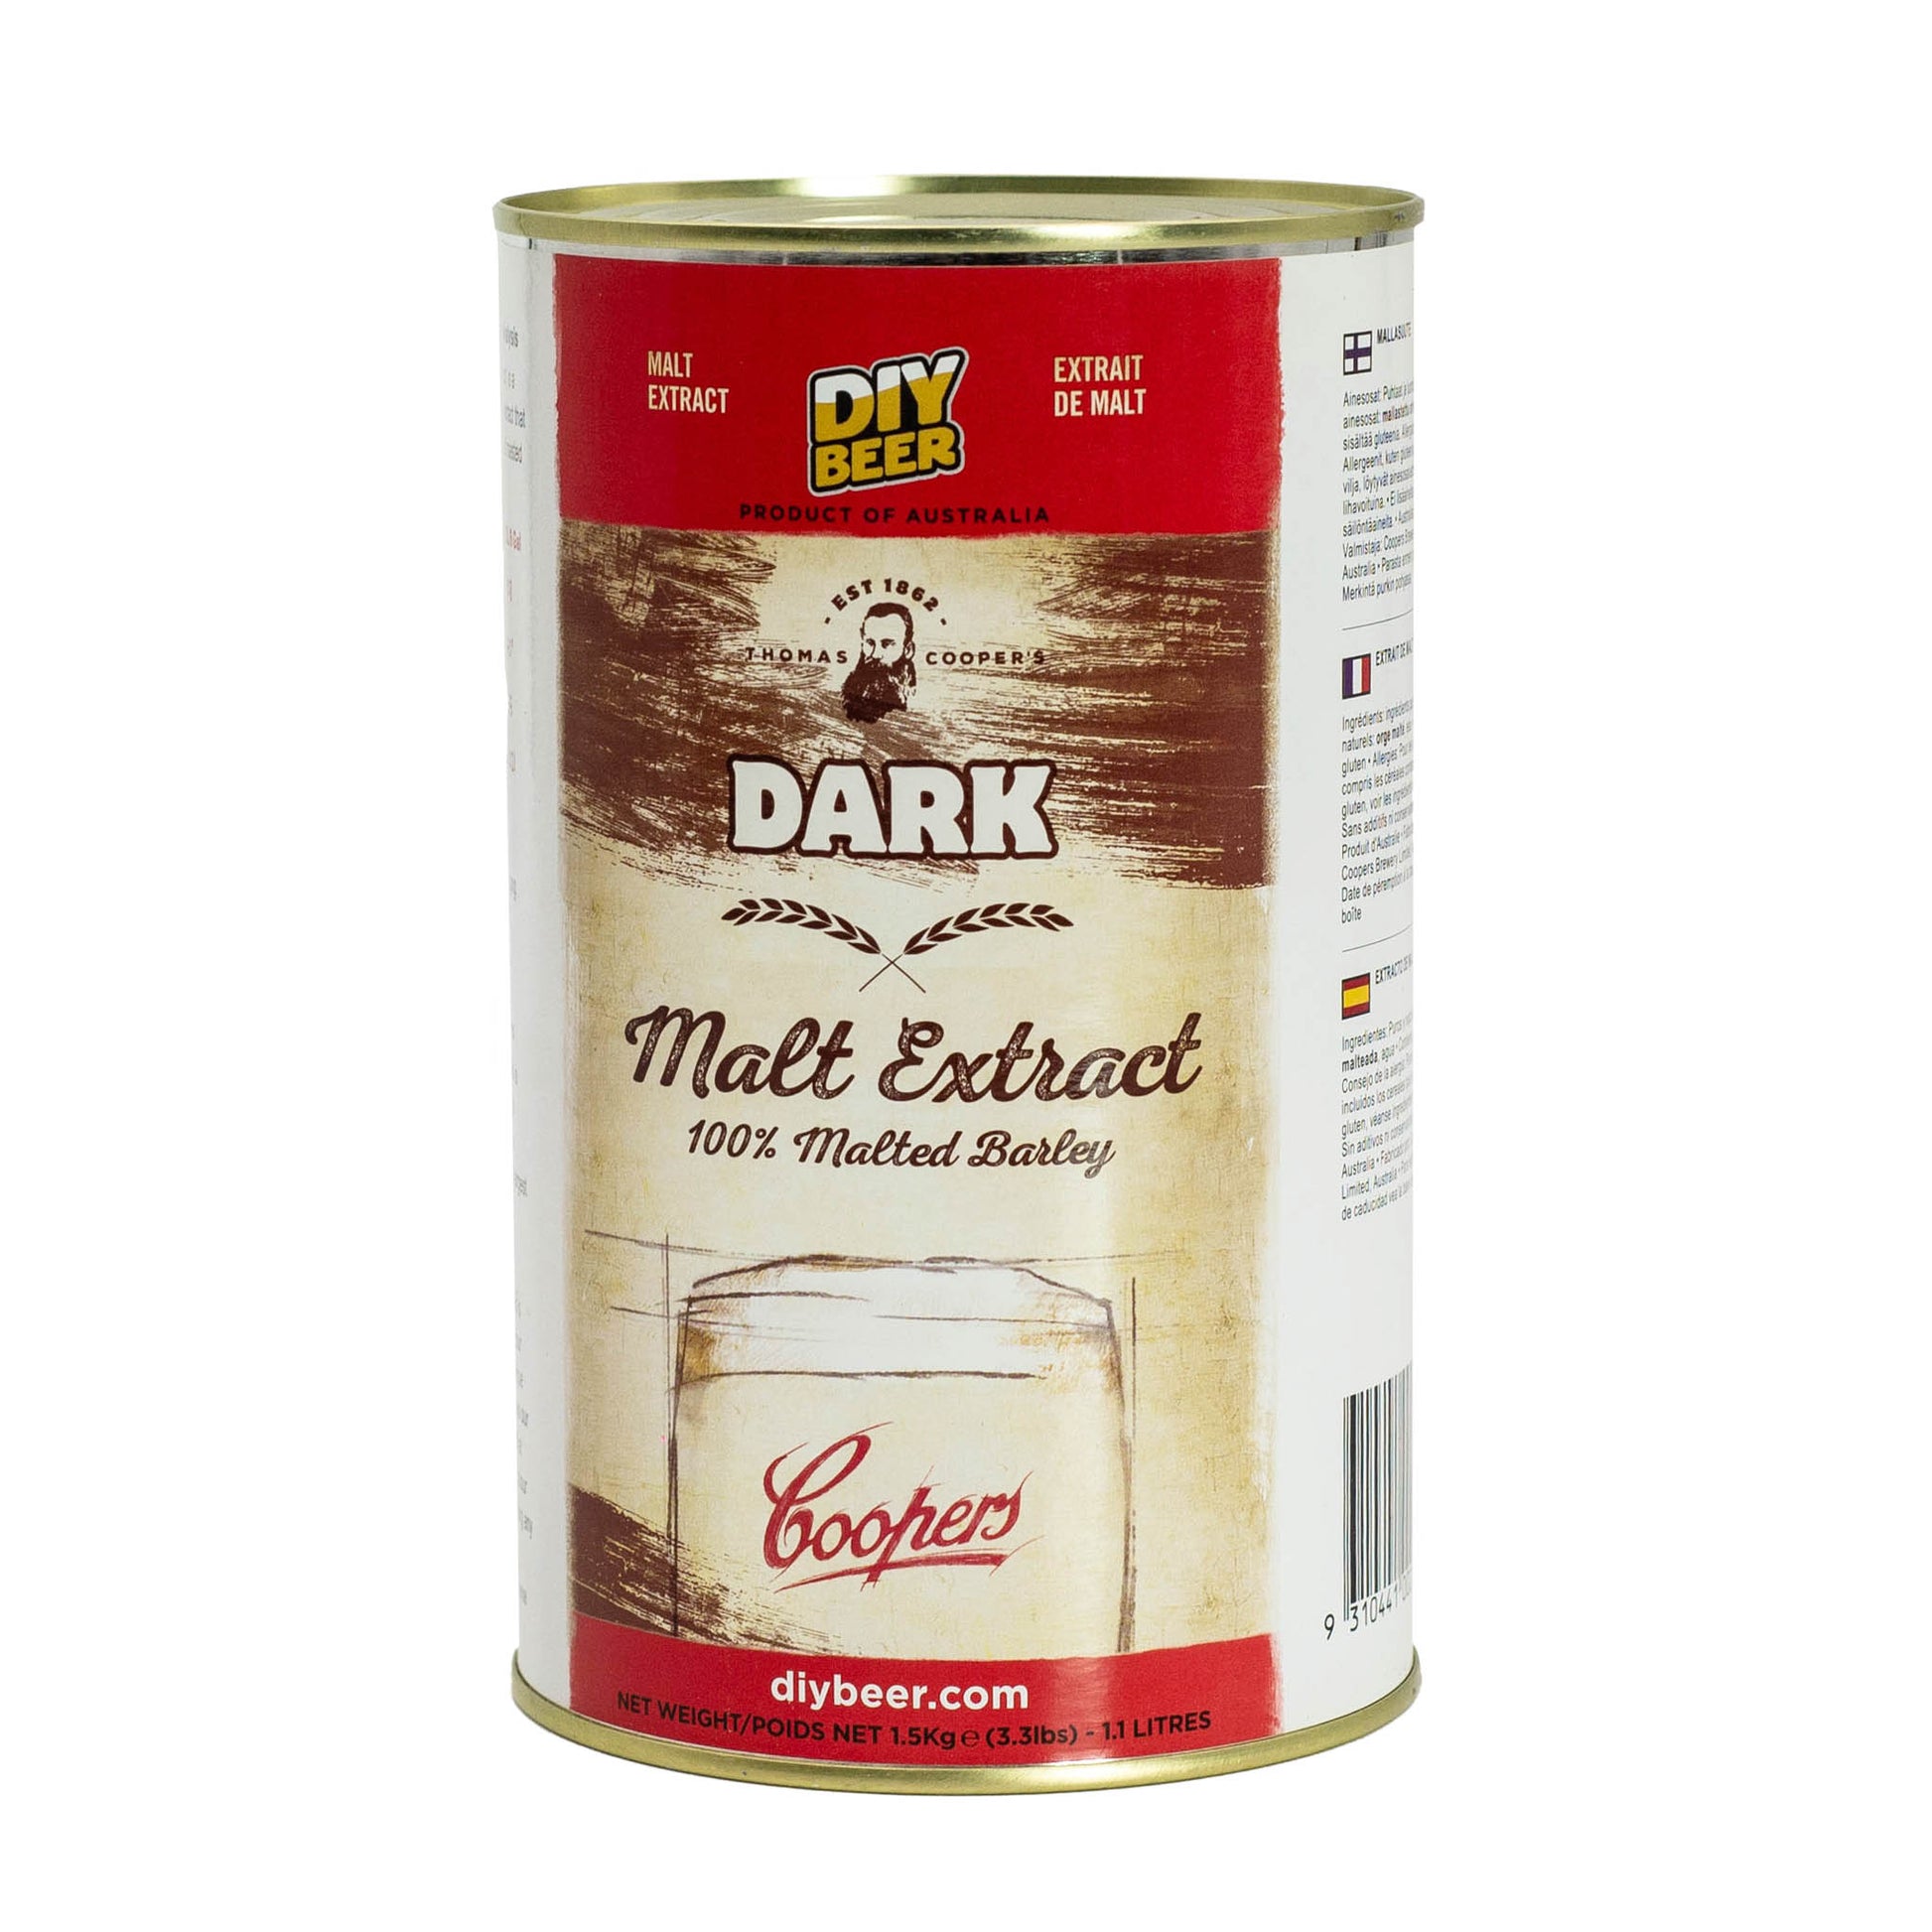 Thomas Coopers Dark malt extract brew tin makes a beer with rich dark hues and hints of roasted coffee aromas